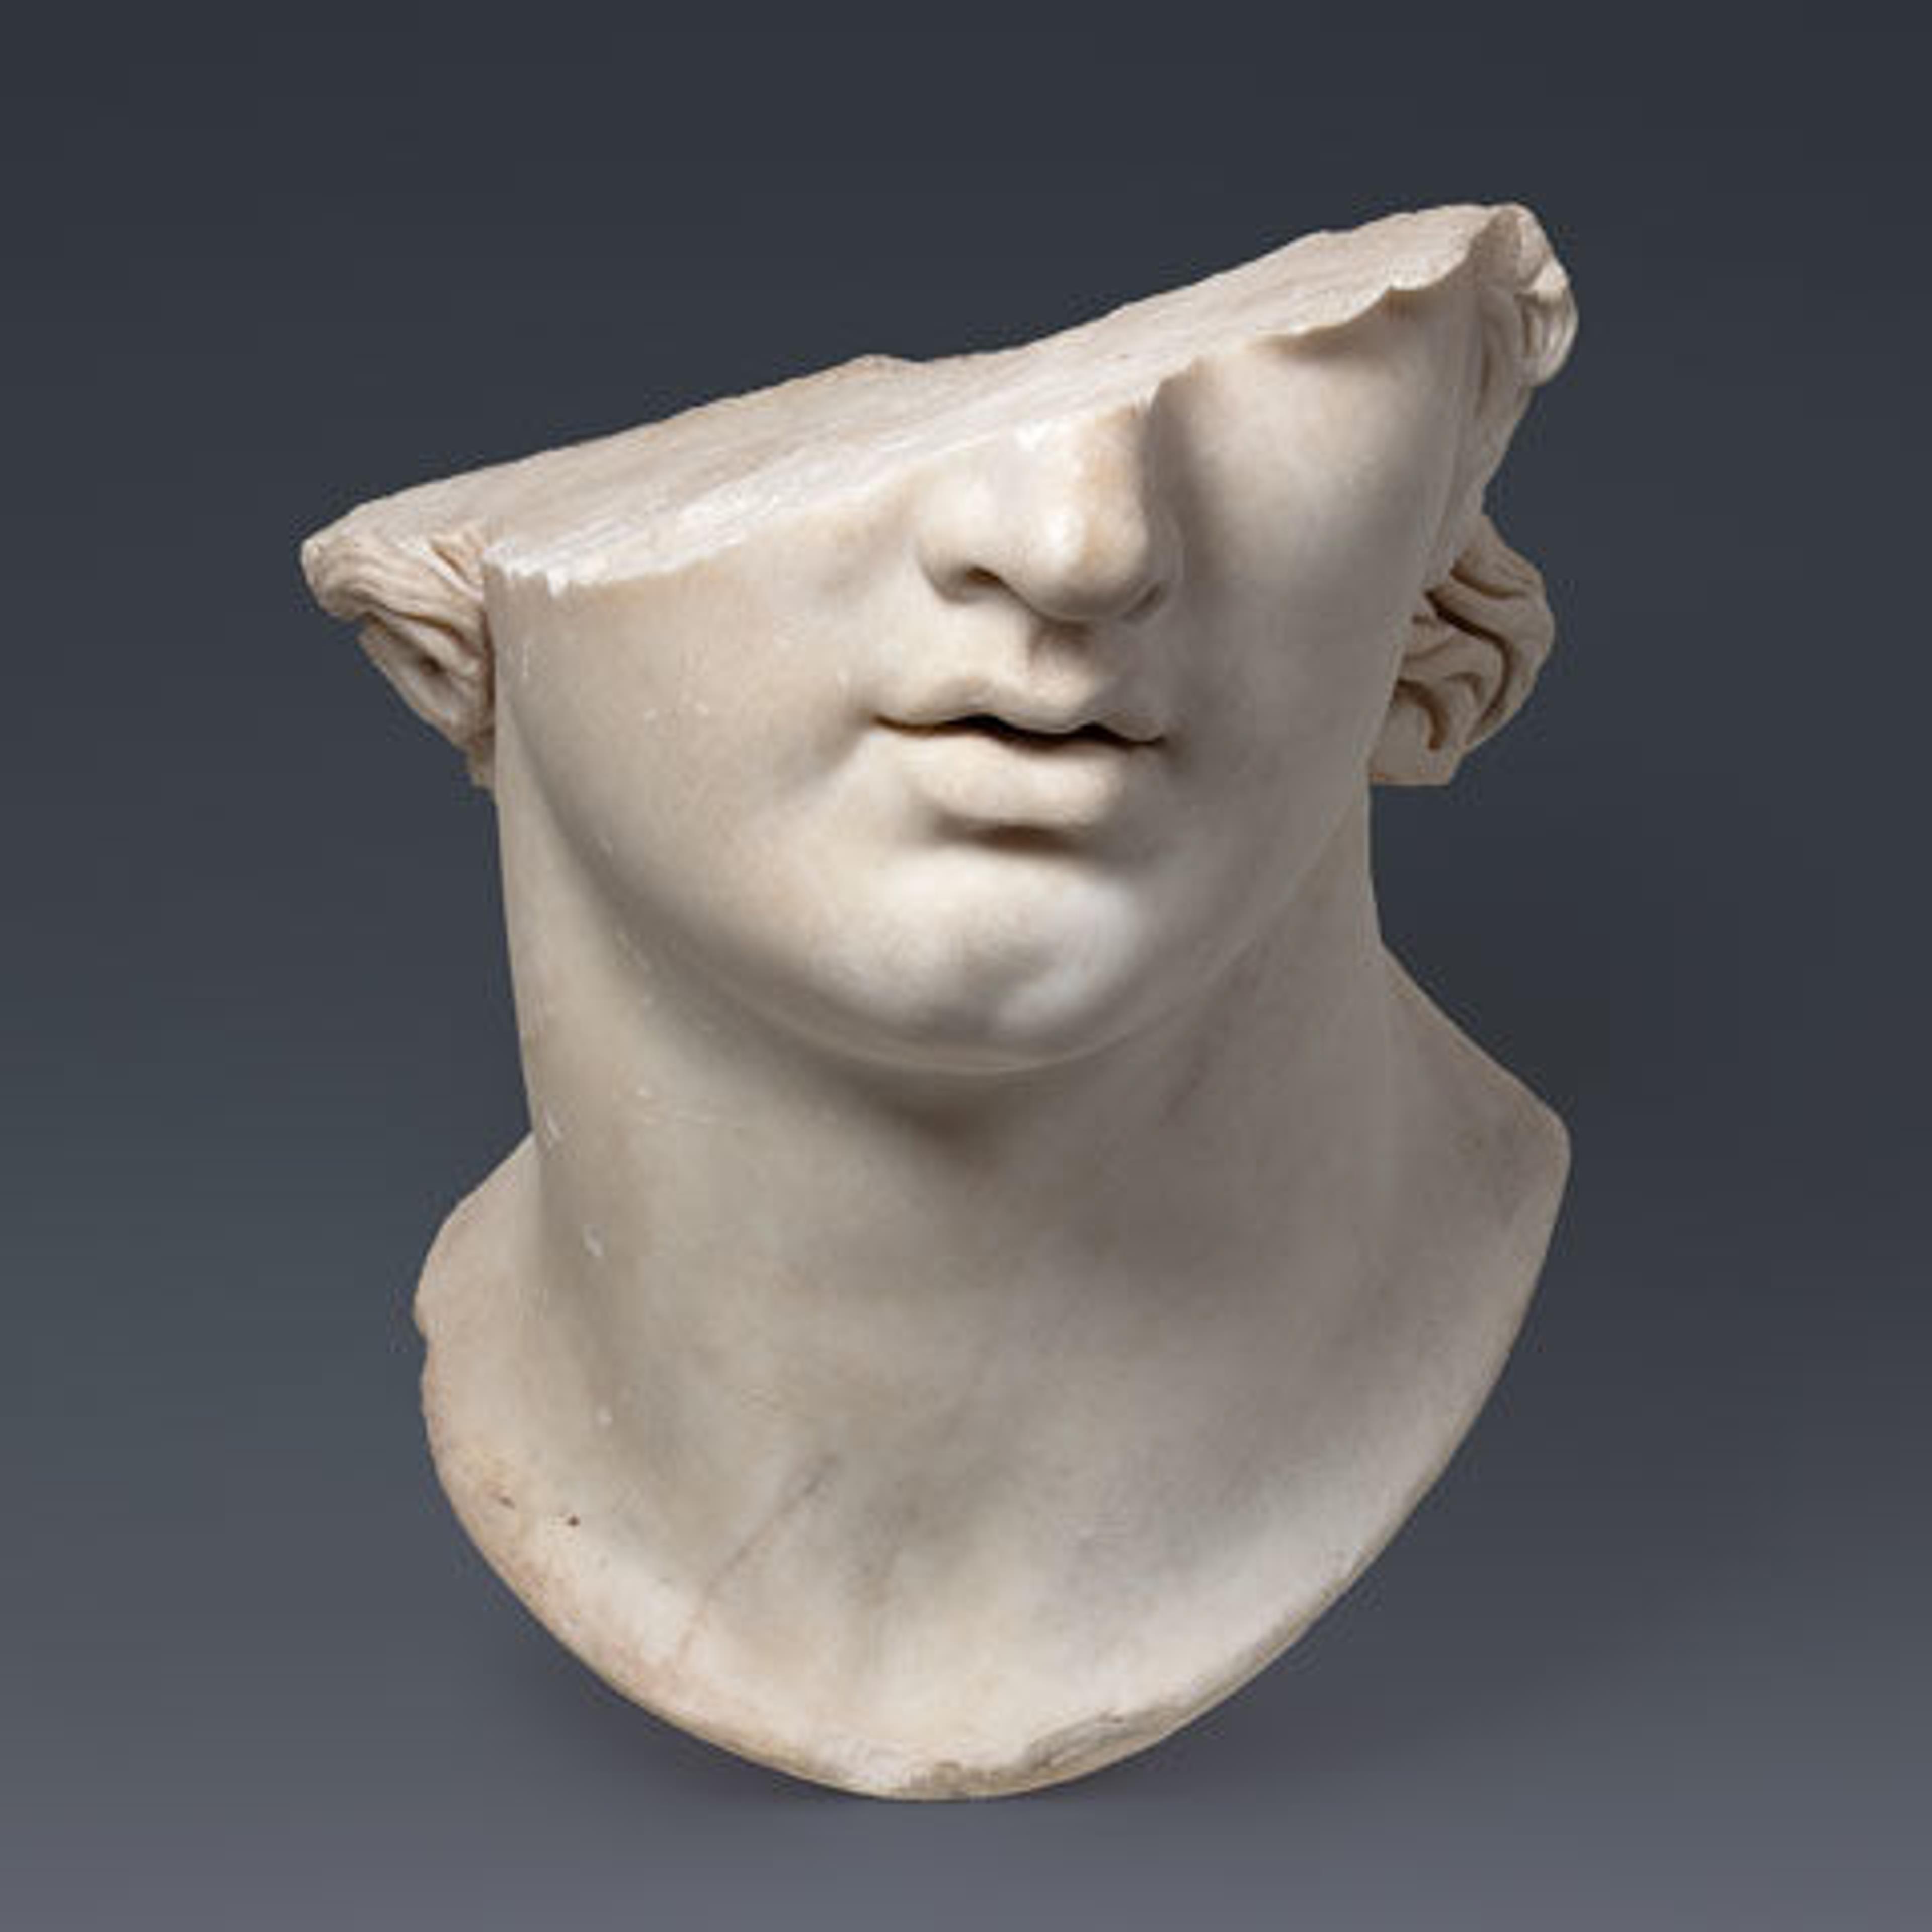 Fragmentary colossal head of a youth